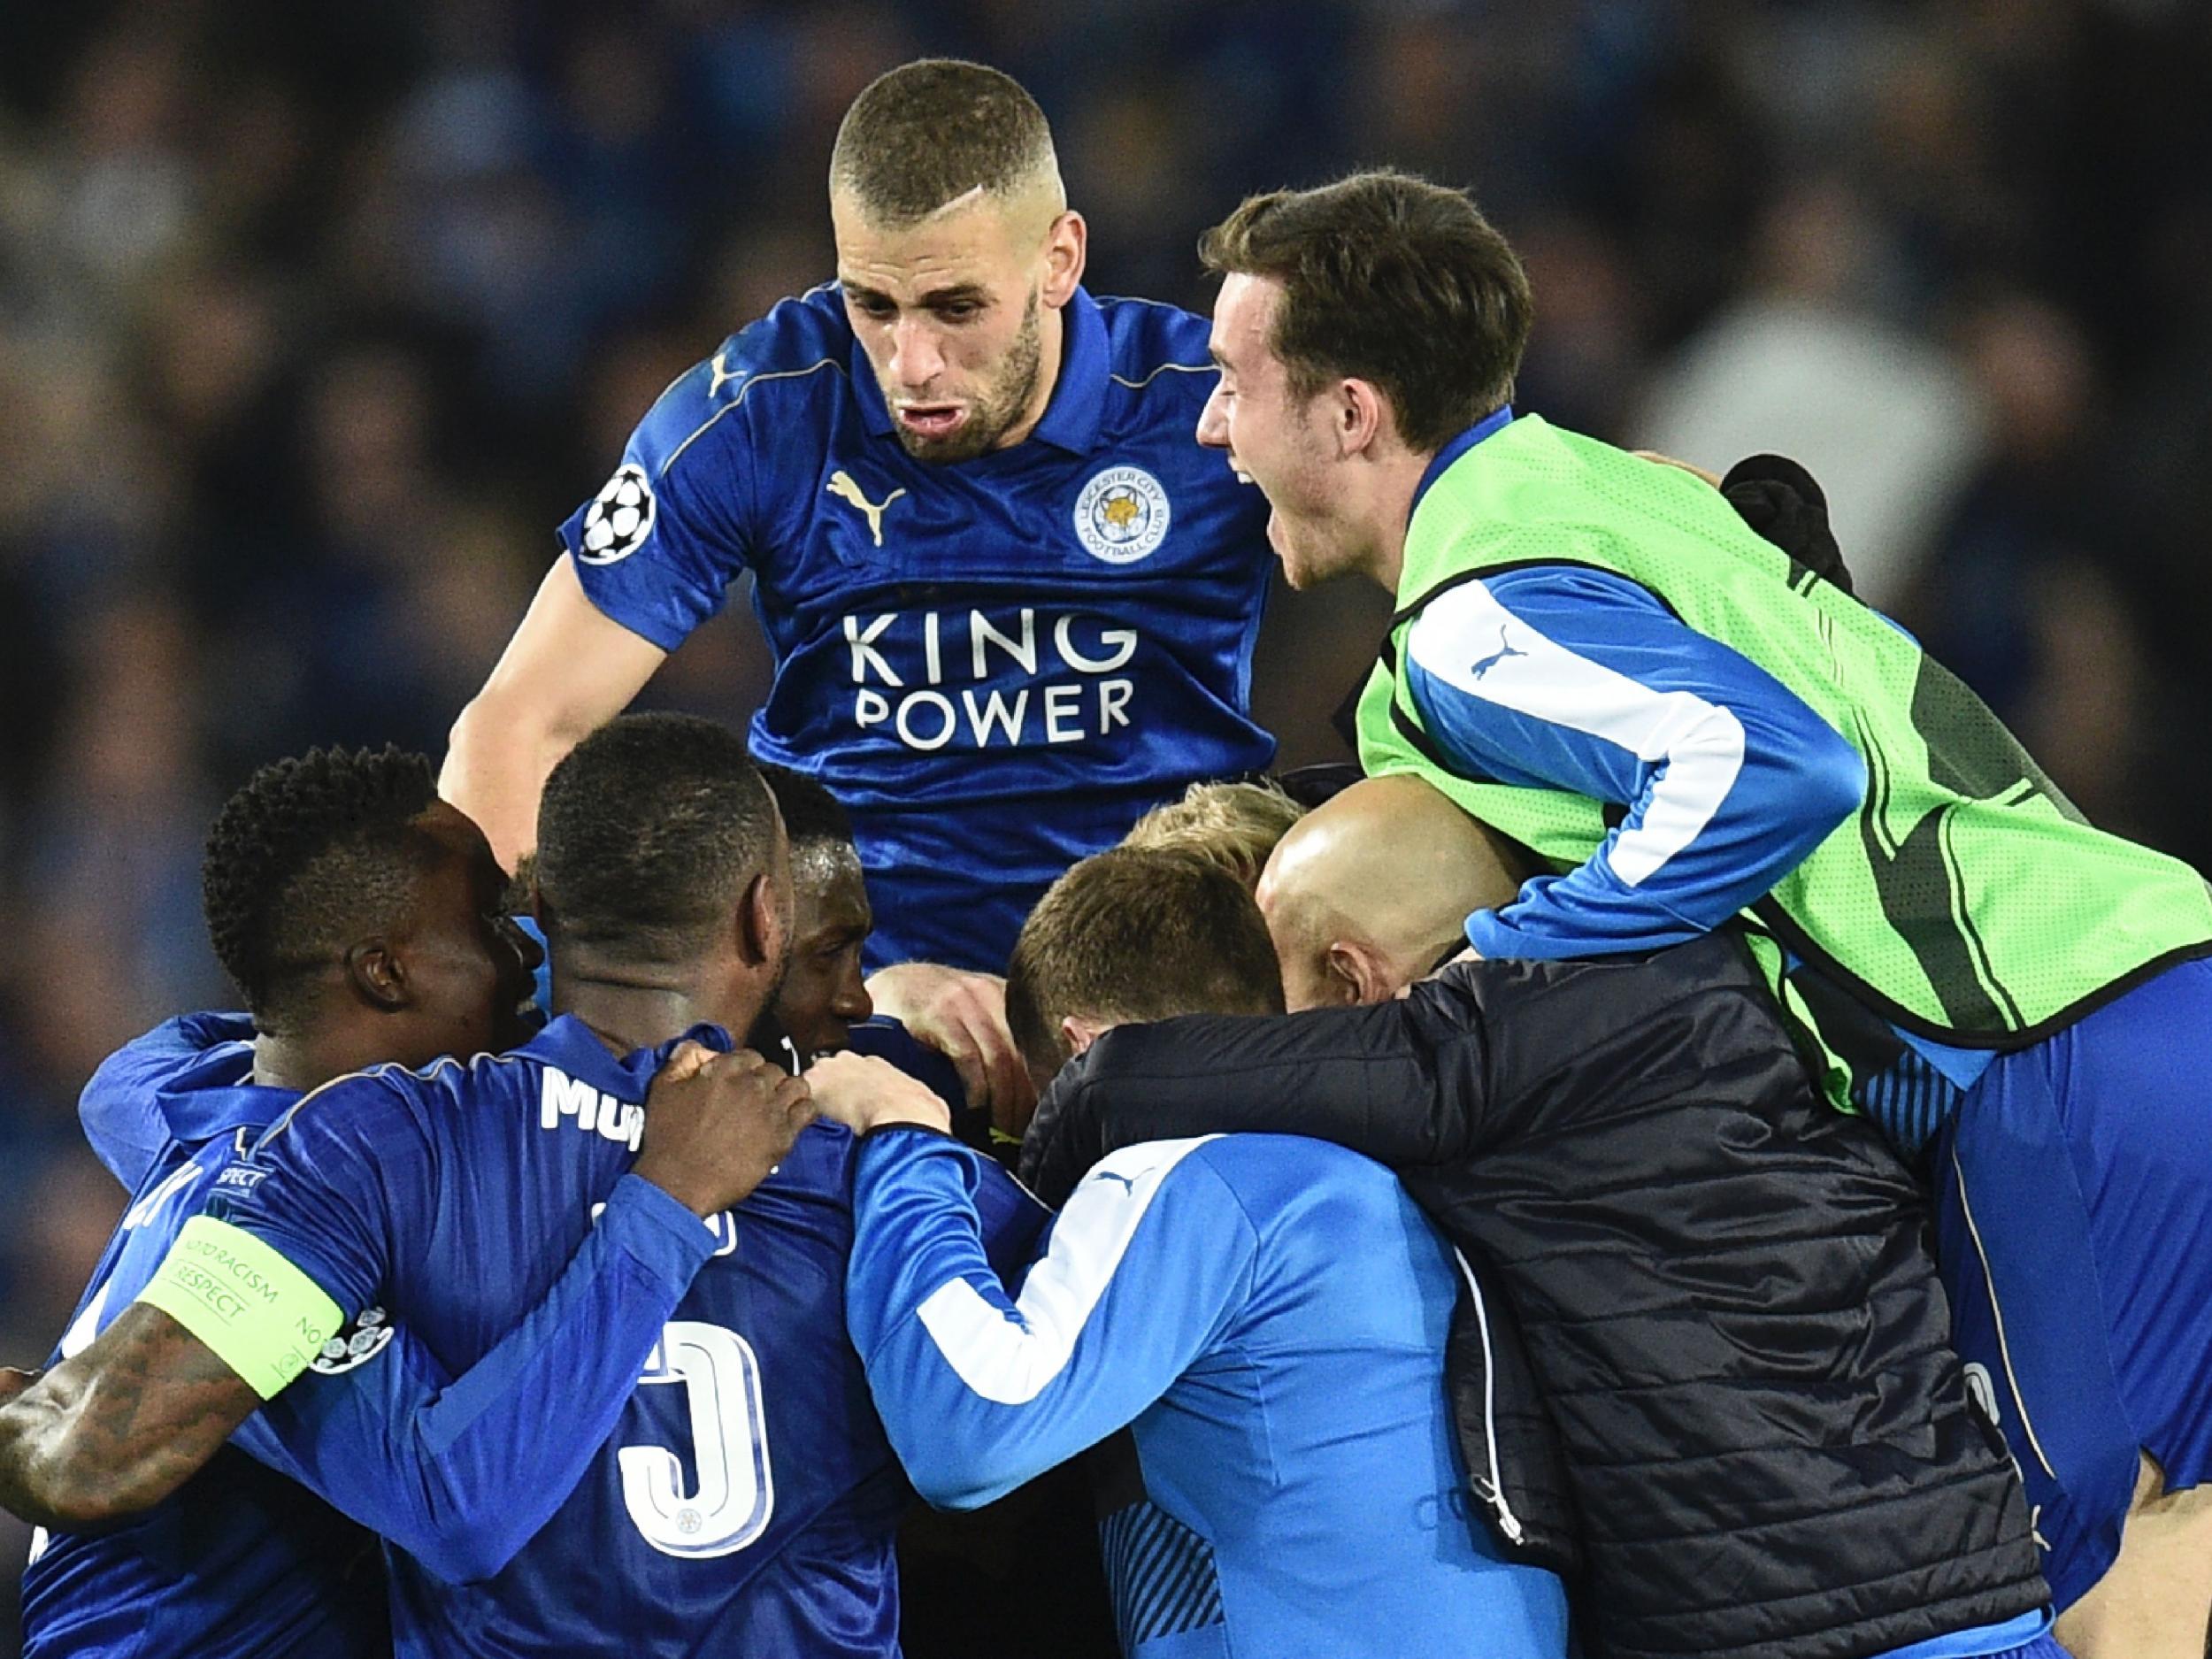 Leicester's players celebrate after the final whistle